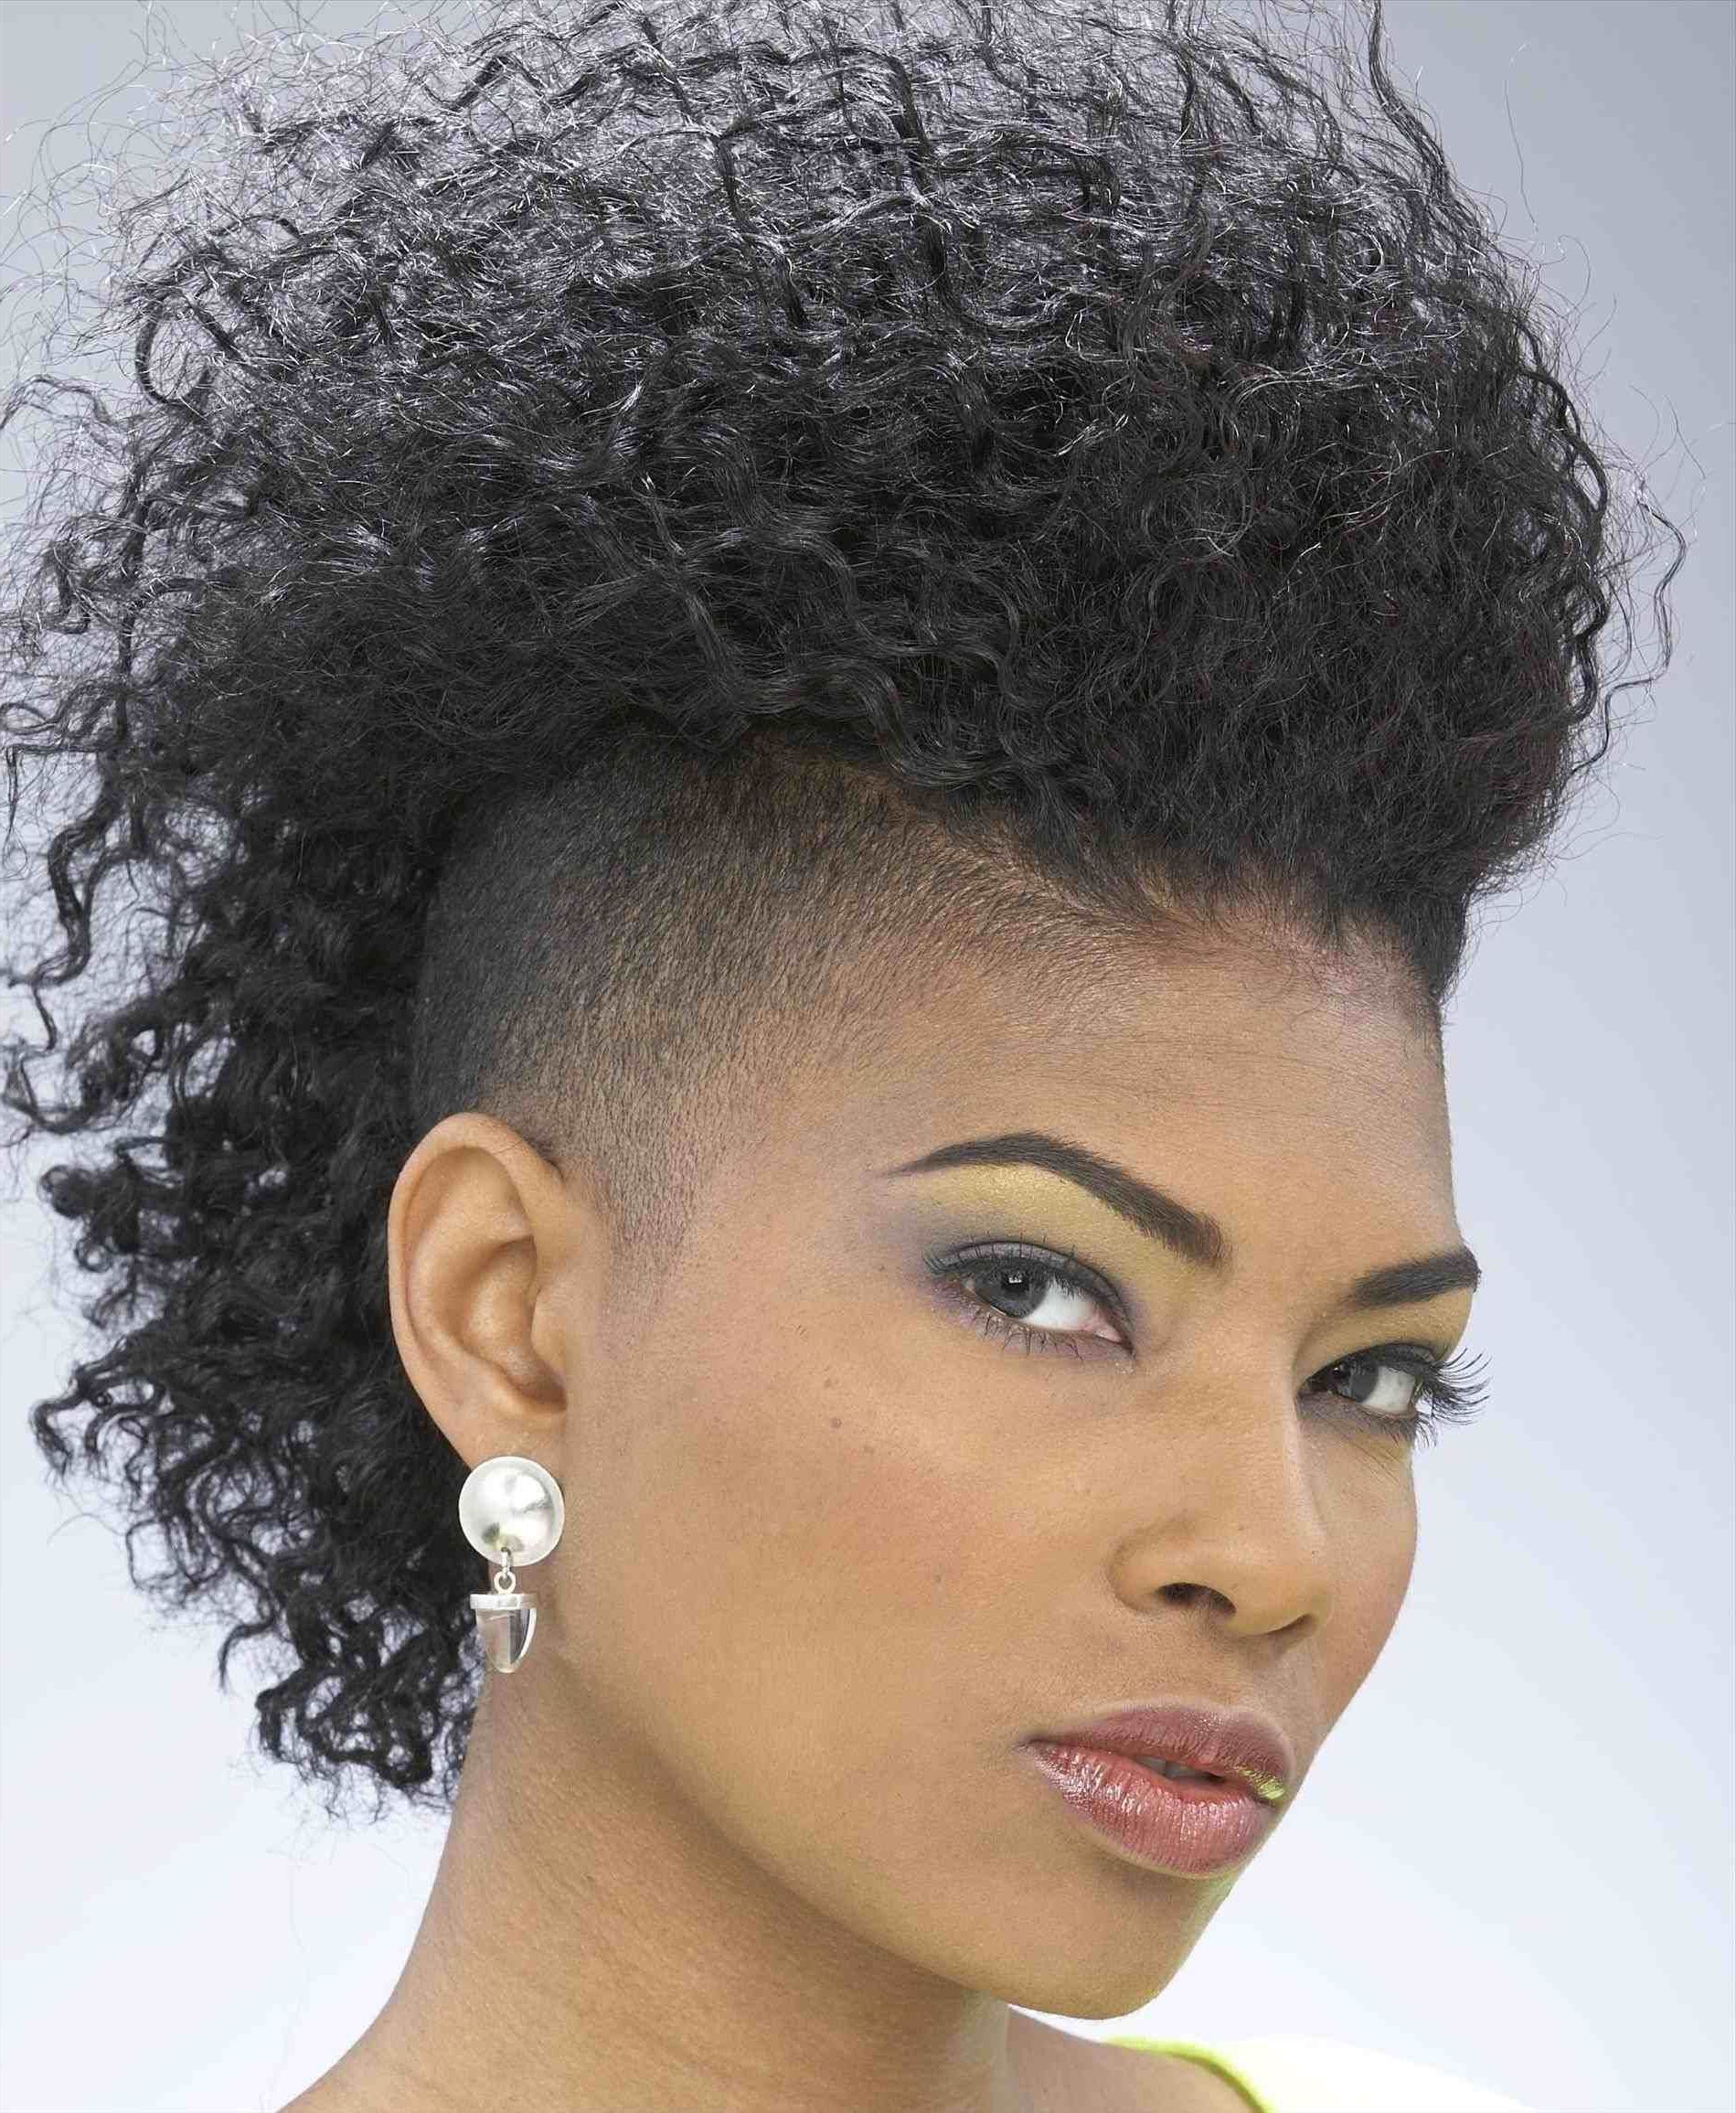 Hair 2018, Curly Hair Pertaining To Favorite Curly Haired Mohawk Hairstyles (View 20 of 20)